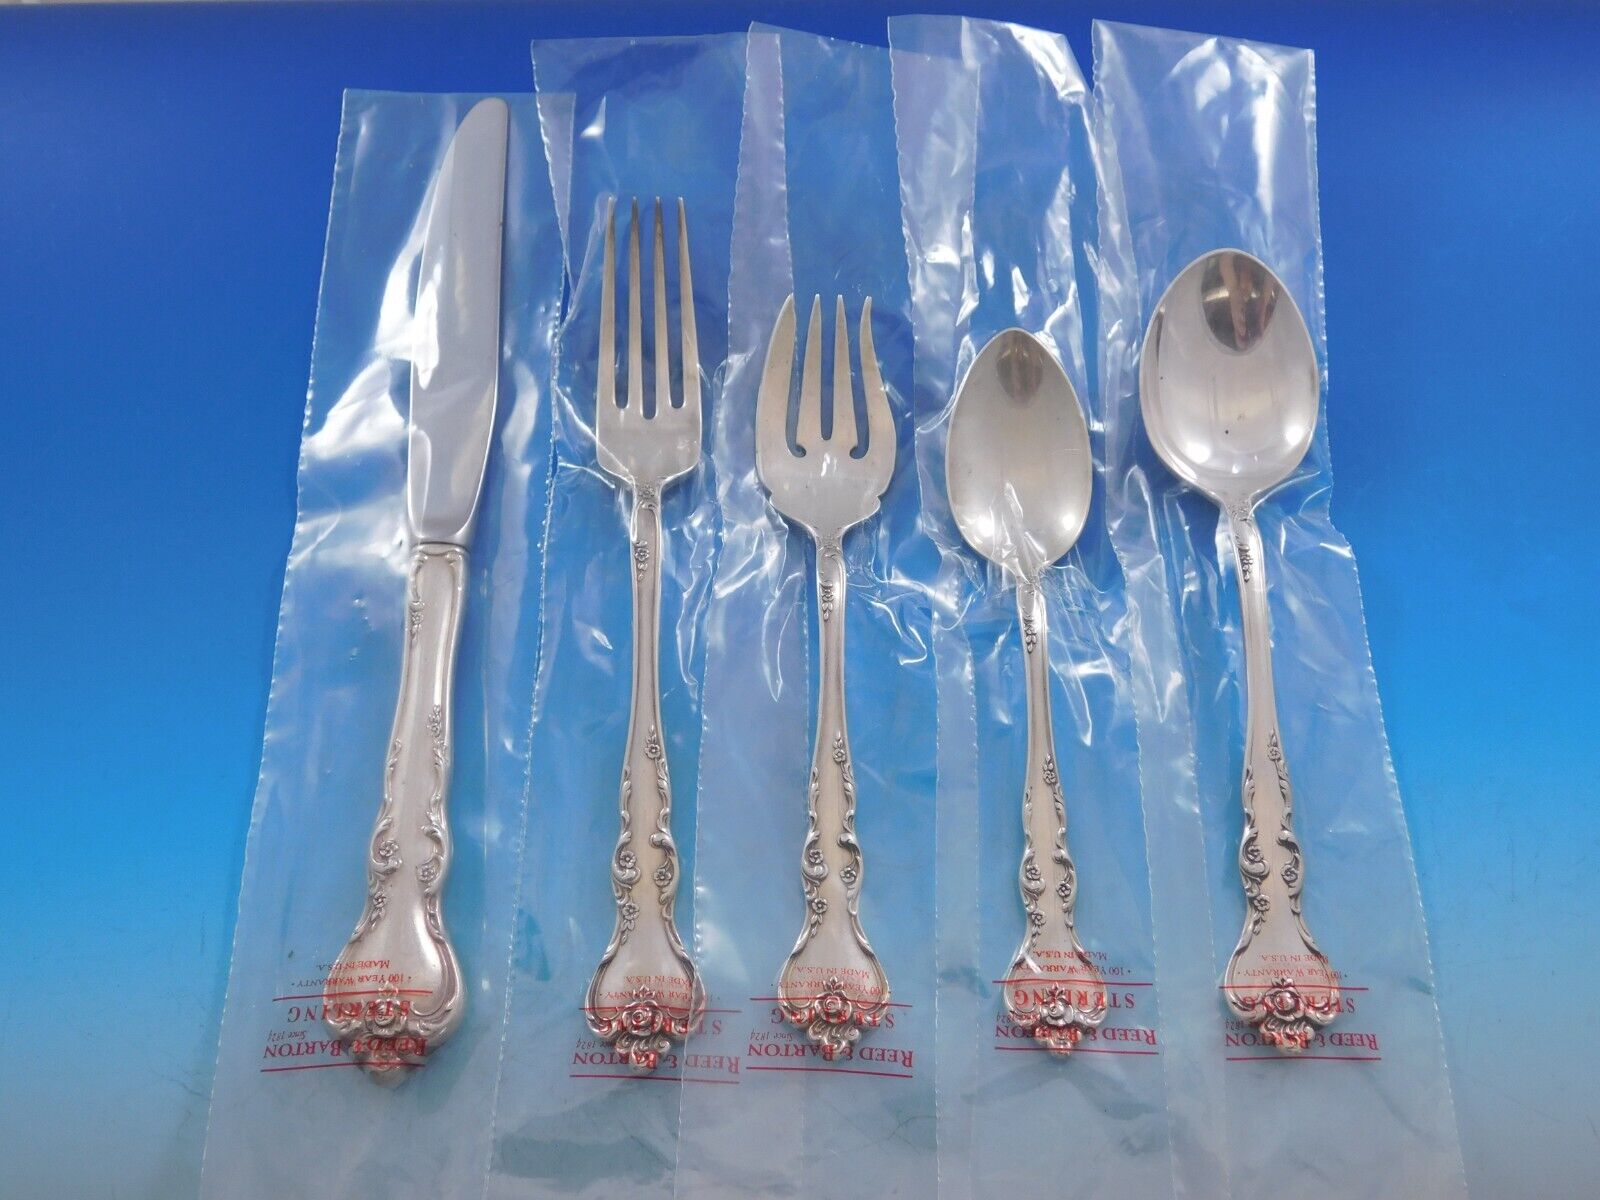 Unused Savannah by Reed & Barton sterling silver flatware set - 98 pieces. This pattern is elegant and timeless. This set includes:

18 knives, 9 1/8